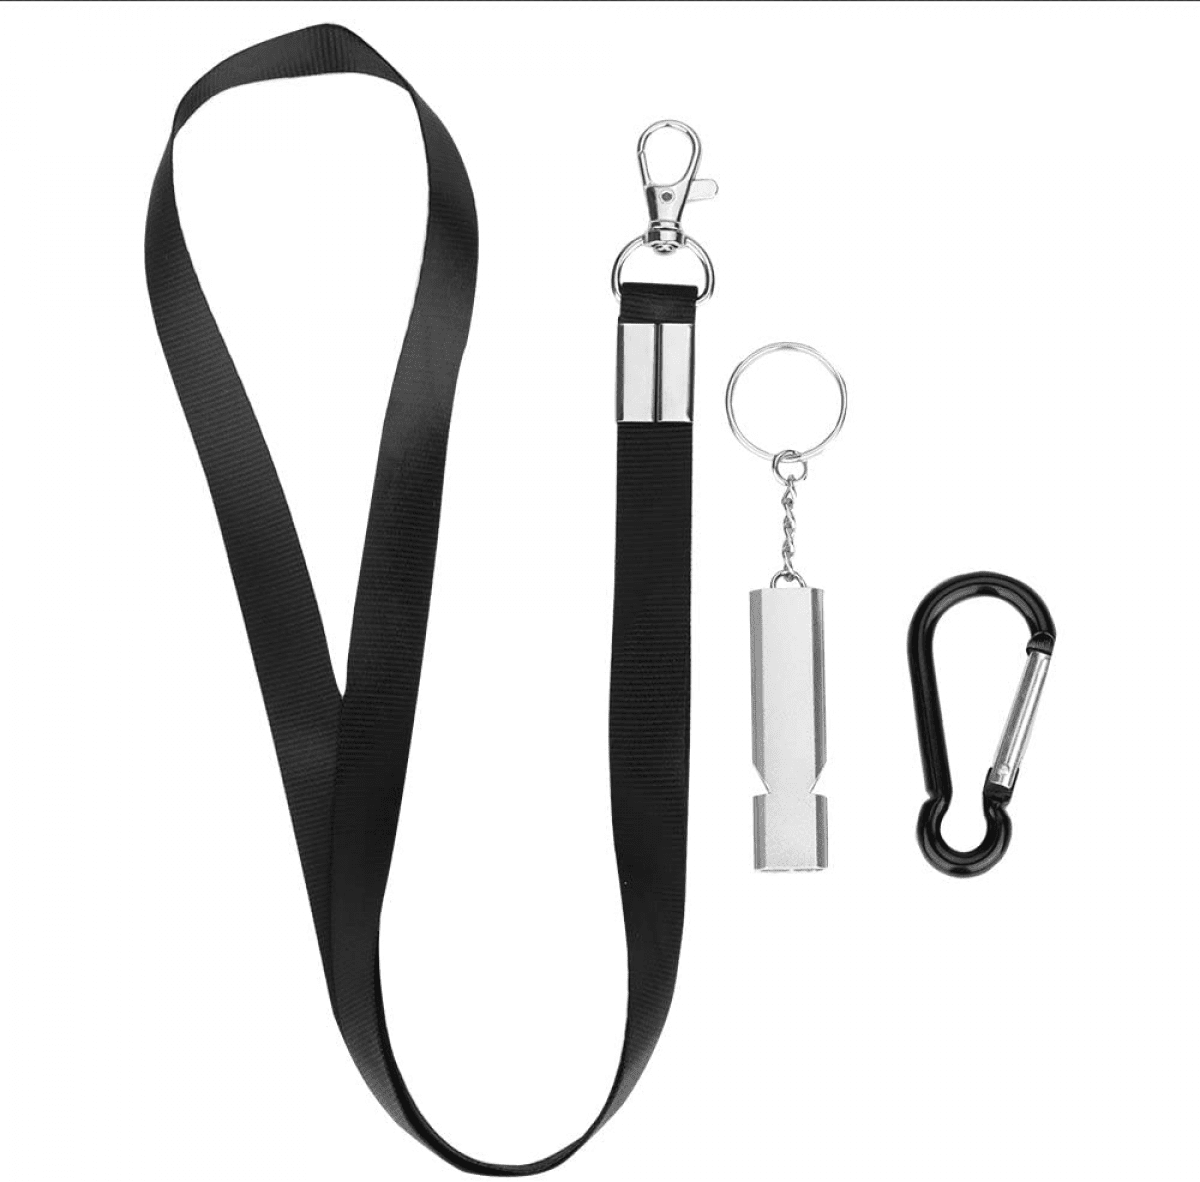 2PCS Outdoor Loudest Emergency Survival Whistles with Carabiner and Lanyard for Camping Hiking Sports Dog Training 